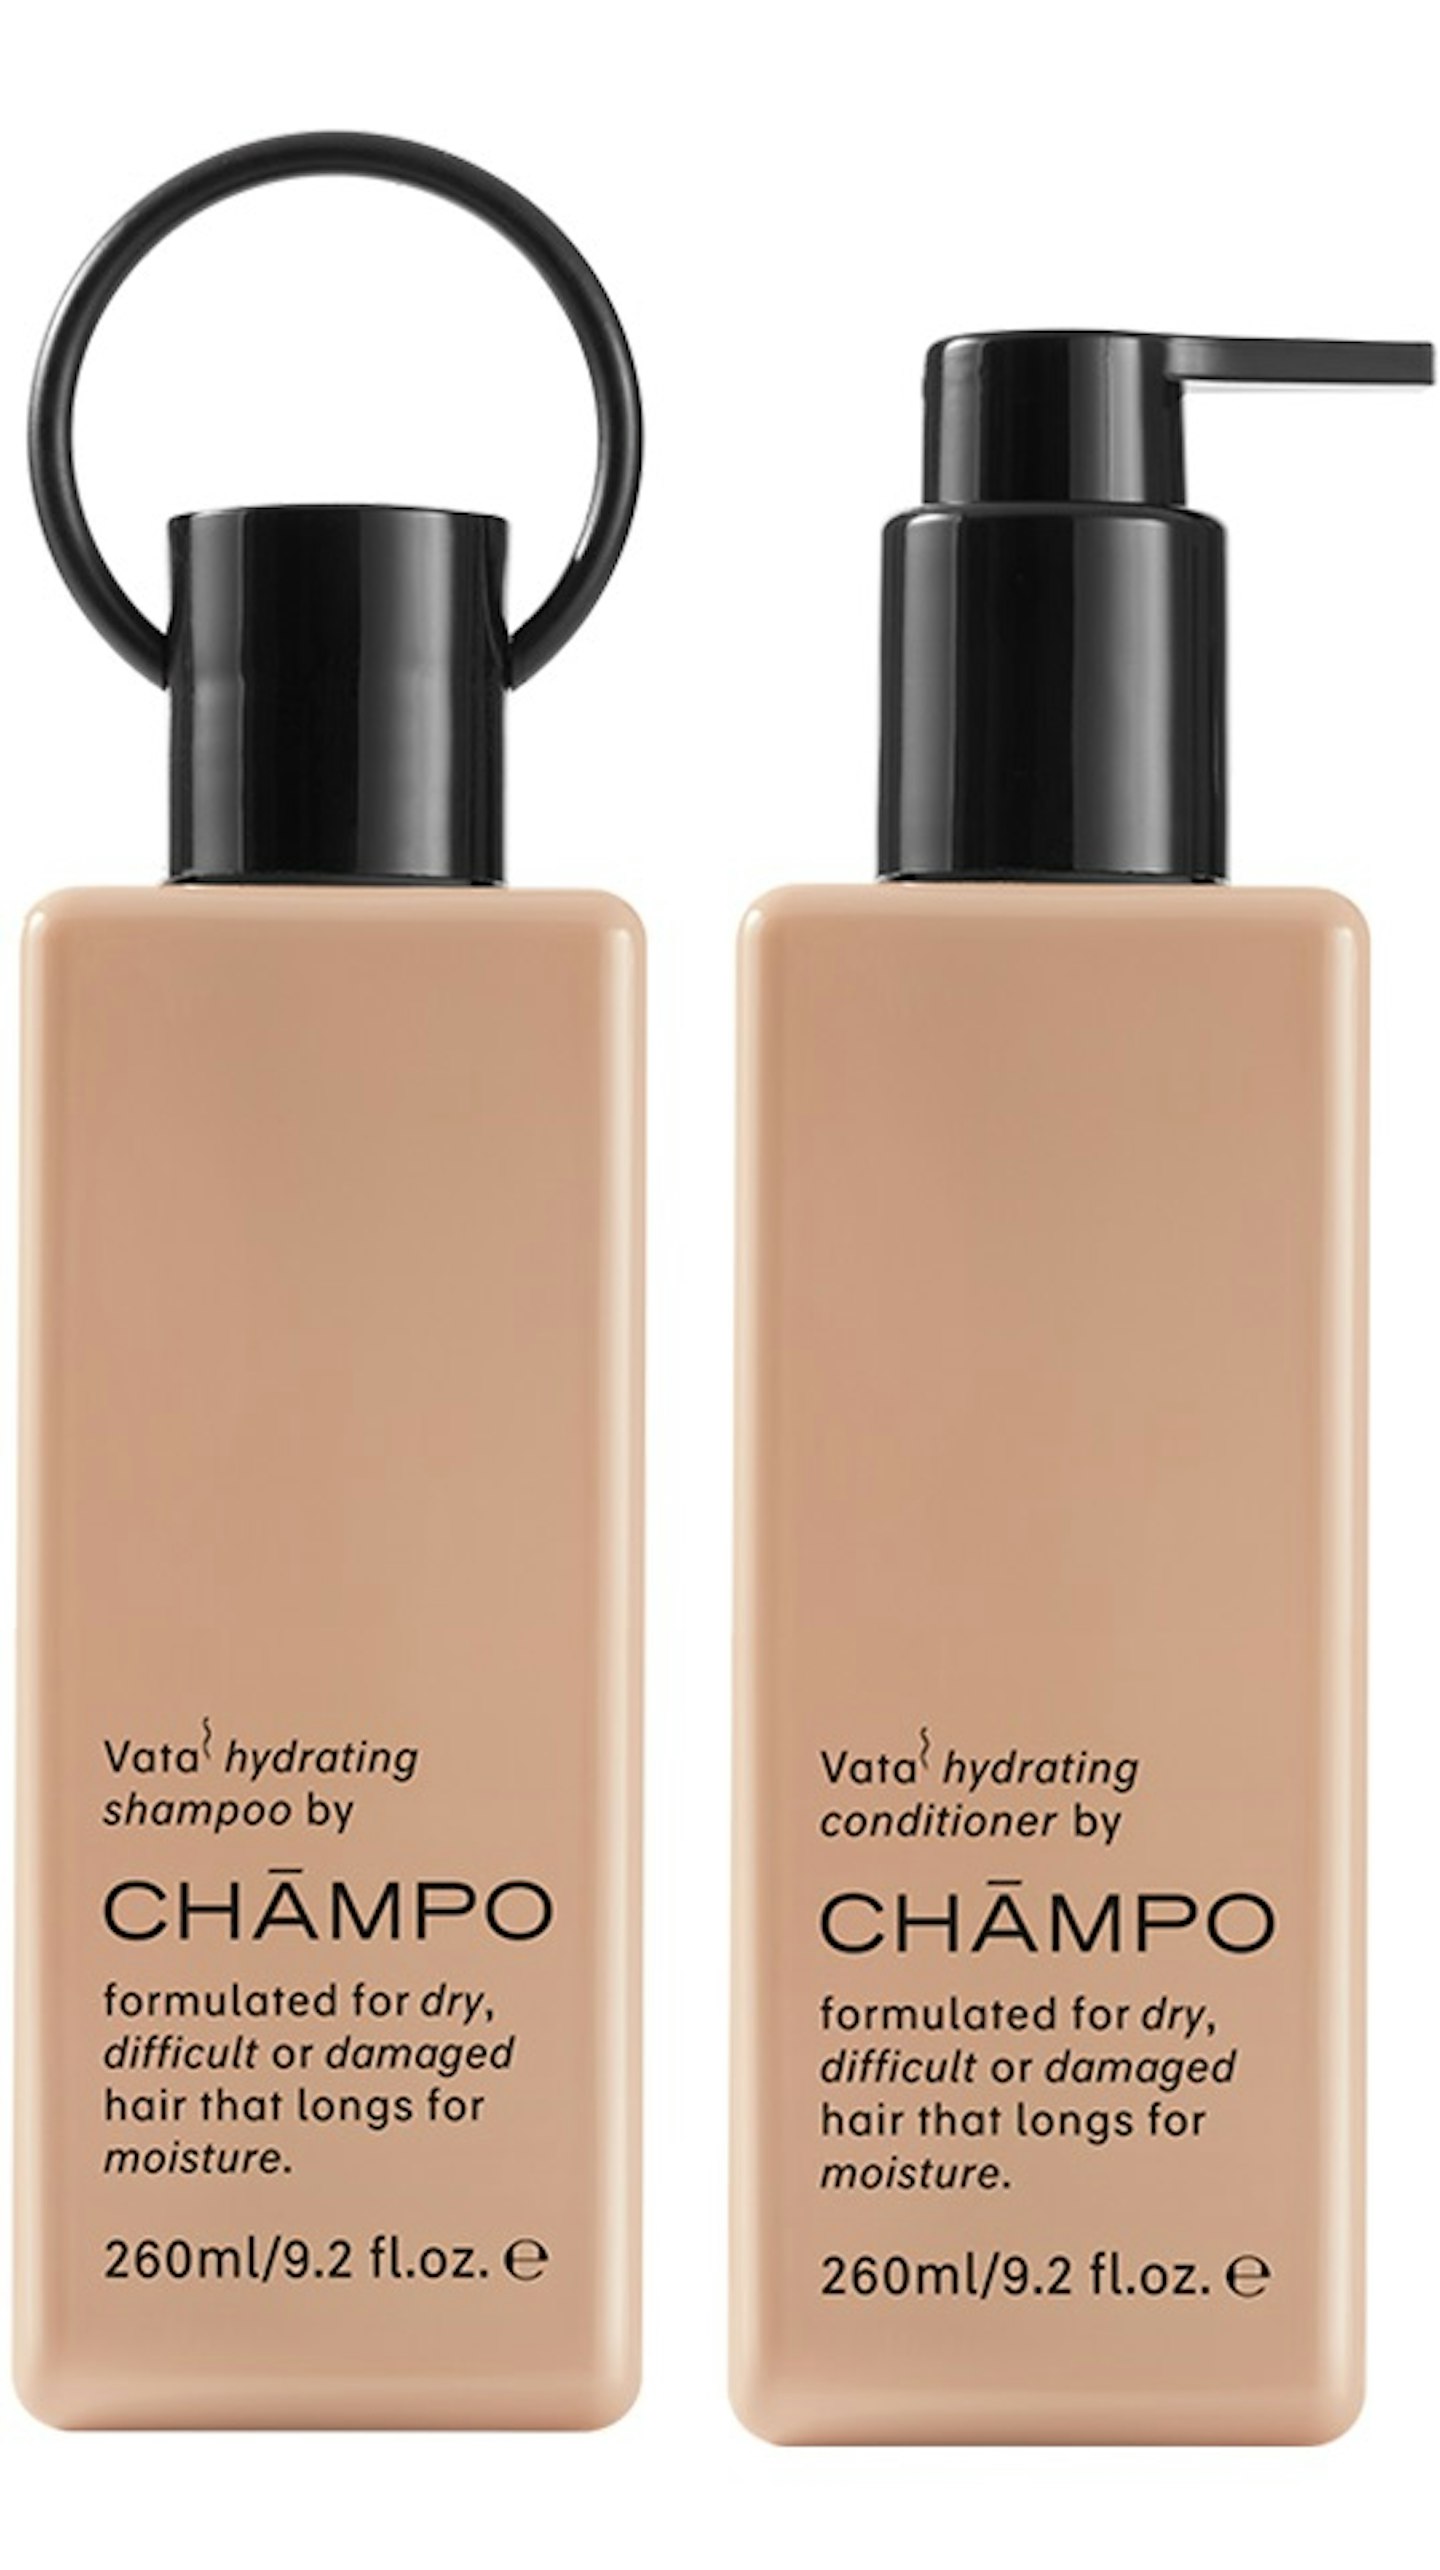 Champo Vata Hydrating Collection, £38.50